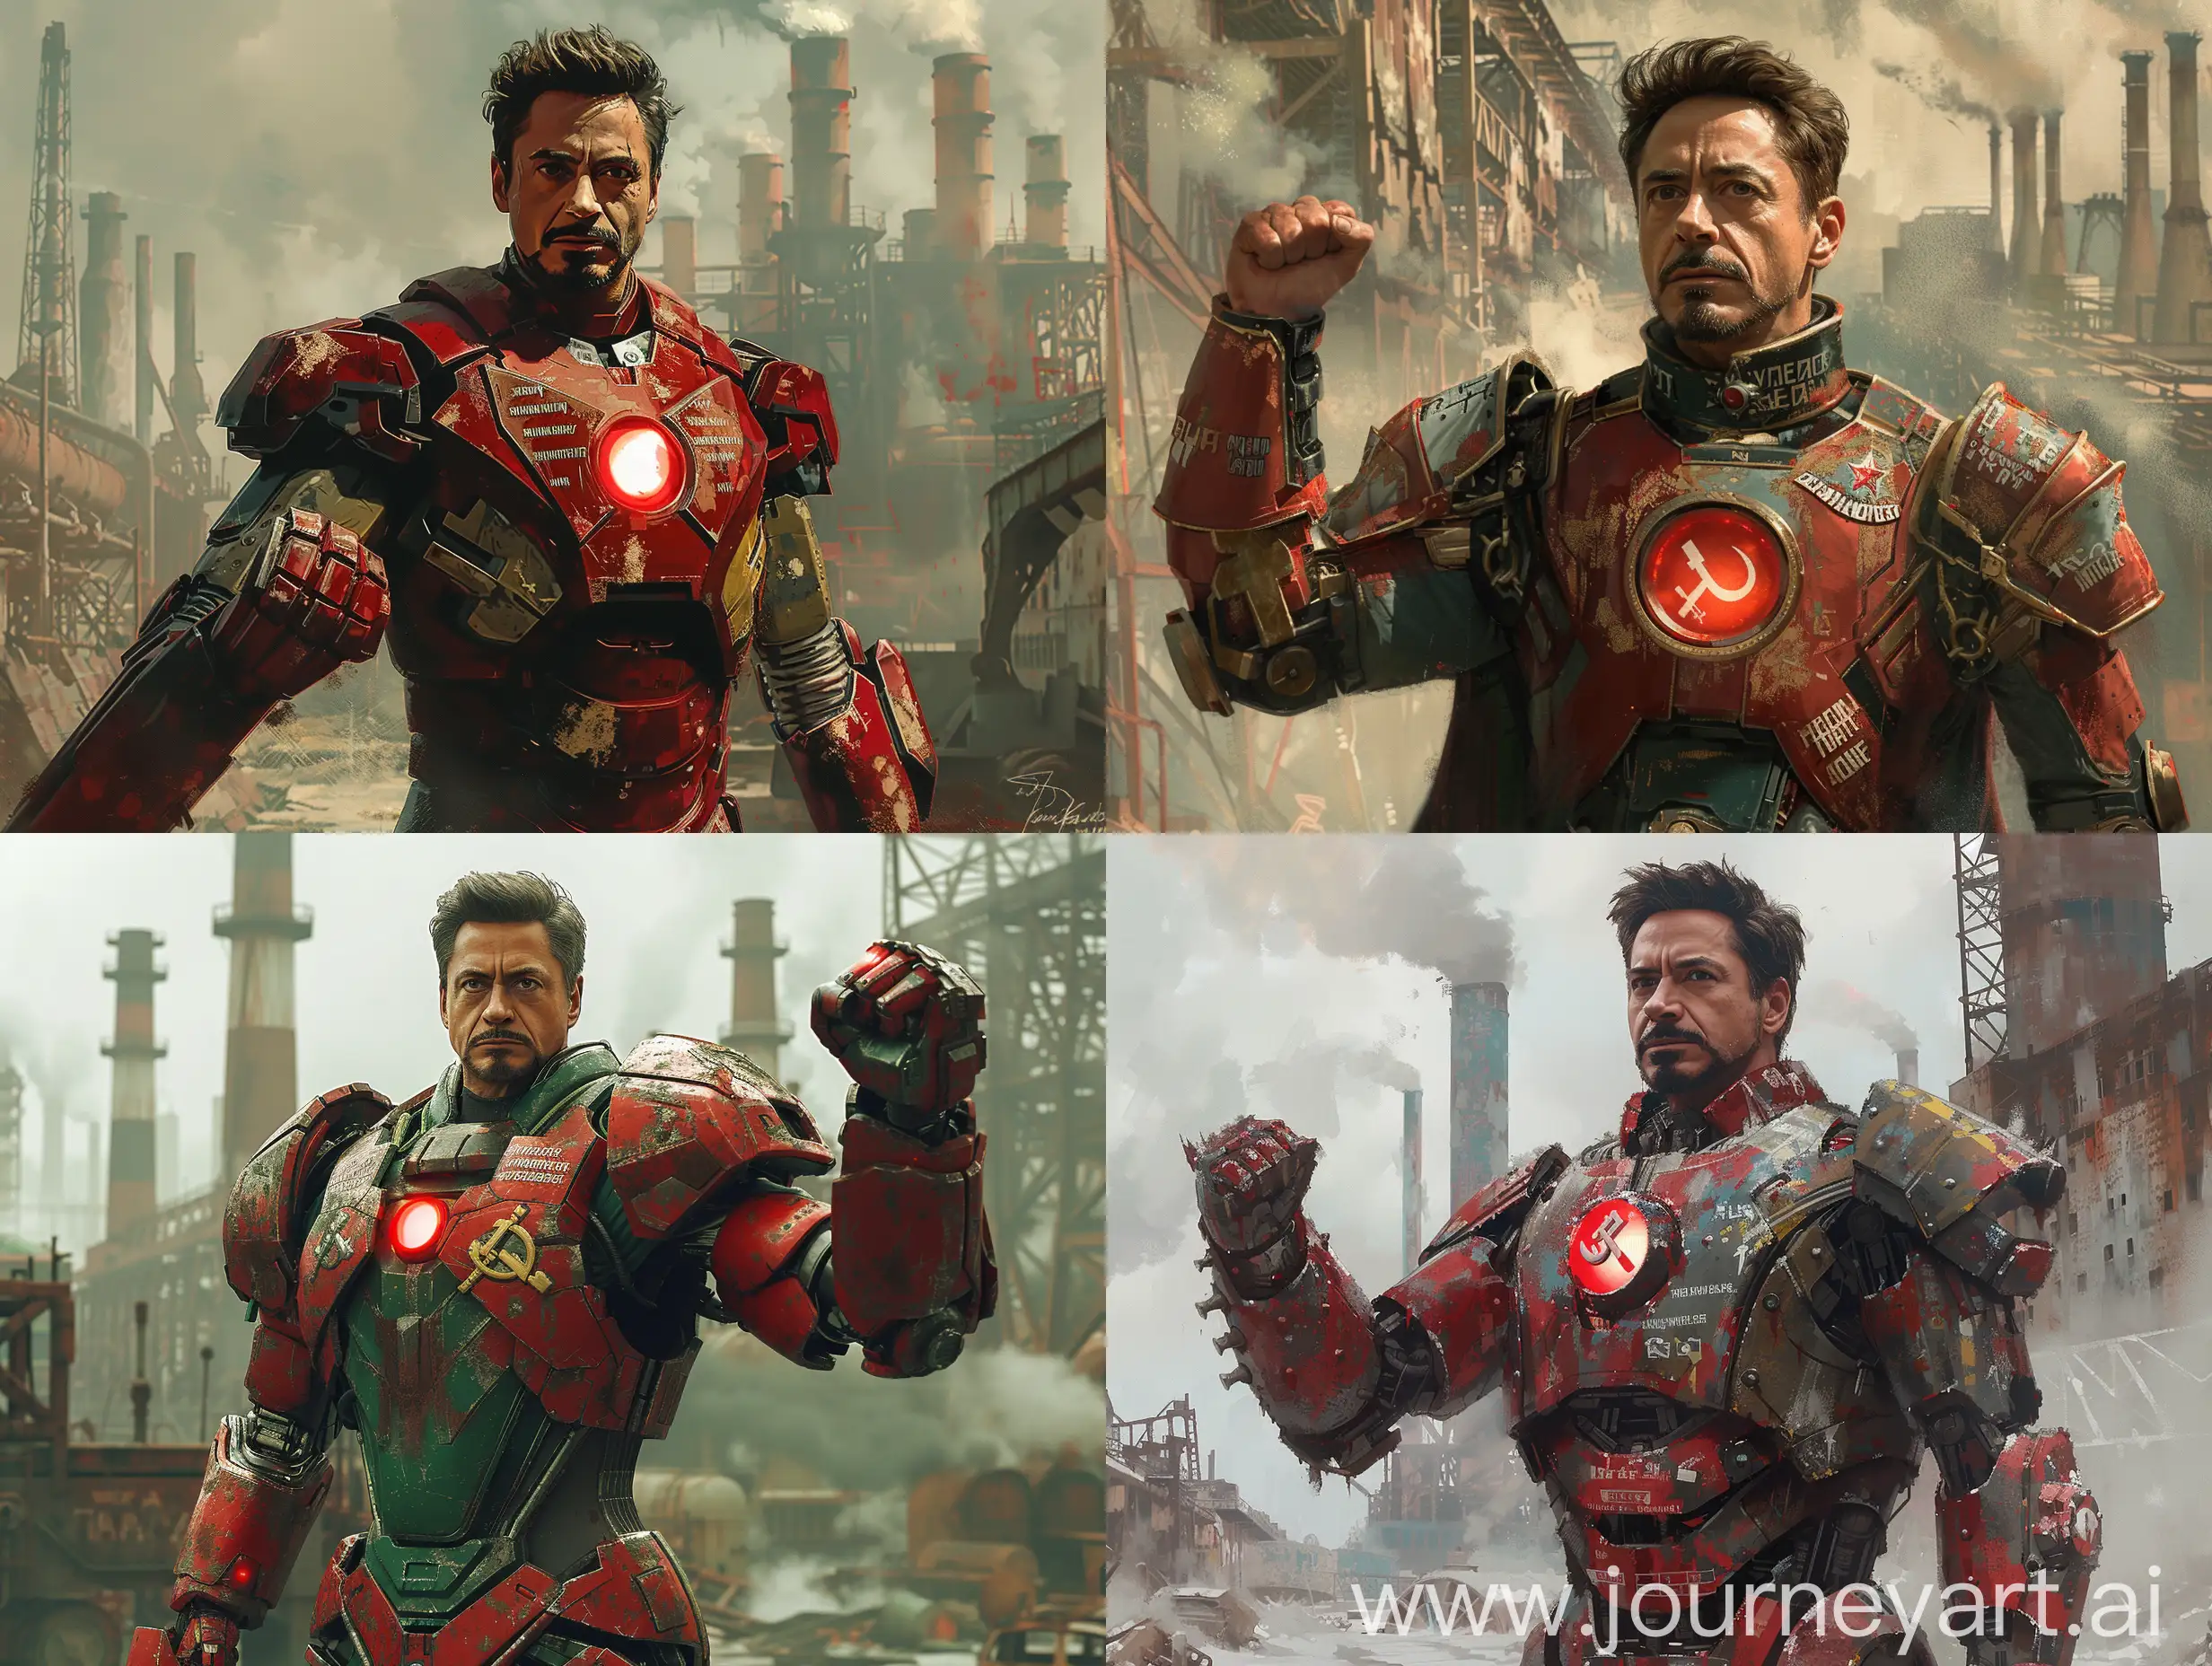 A Soviet-era exosuit-clad superhero, resembling Iron Man but with distinct features reflecting the Cold War aesthetic.
The exosuit is a mix of heavy, industrial-looking metal plating painted in faded red and olive-green Soviet military colors. Its design incorporates iconic Soviet symbols such as the hammer and sickle, subtly engraved on the chestplate. The suit is adorned with Cyrillic writings and features advanced, yet slightly bulky, technology reminiscent of the era.
The superhero inside the exosuit, a determined and stern figure, stands tall with a raised fist. In one hand, he wields a modified energy weapon that emits a radiant red glow, symbolizing the power of socialism. His other hand is firmly clenched, showcasing strength and resilience.
The scene is set in a vast, crumbling industrial complex from the Soviet era, filled with dilapidated factories, smokestacks, and remnants of a bygone era. The air is thick with dust and the sky is overcast, casting a somber atmosphere over the landscape. Faint traces of Soviet propaganda posters can be seen peeling off the decaying walls, depicting messages of unity and strength. The overall style of the scene is heavily influenced by Soviet Realism art, with muted colors and a focus on portraying the heroic proletariat. Gritty and Industrial: The environment is filled with the remnants of heavy industry, rusty machinery, and abandoned factories, reflecting the harsh realities of the Soviet era. Contrasting Red Glow: The red glow from the superhero's energy weapon stands out vividly against the dull and faded background, symbolizing the enduring spirit of the Soviet people ‐‐q . 25 --stylize 500